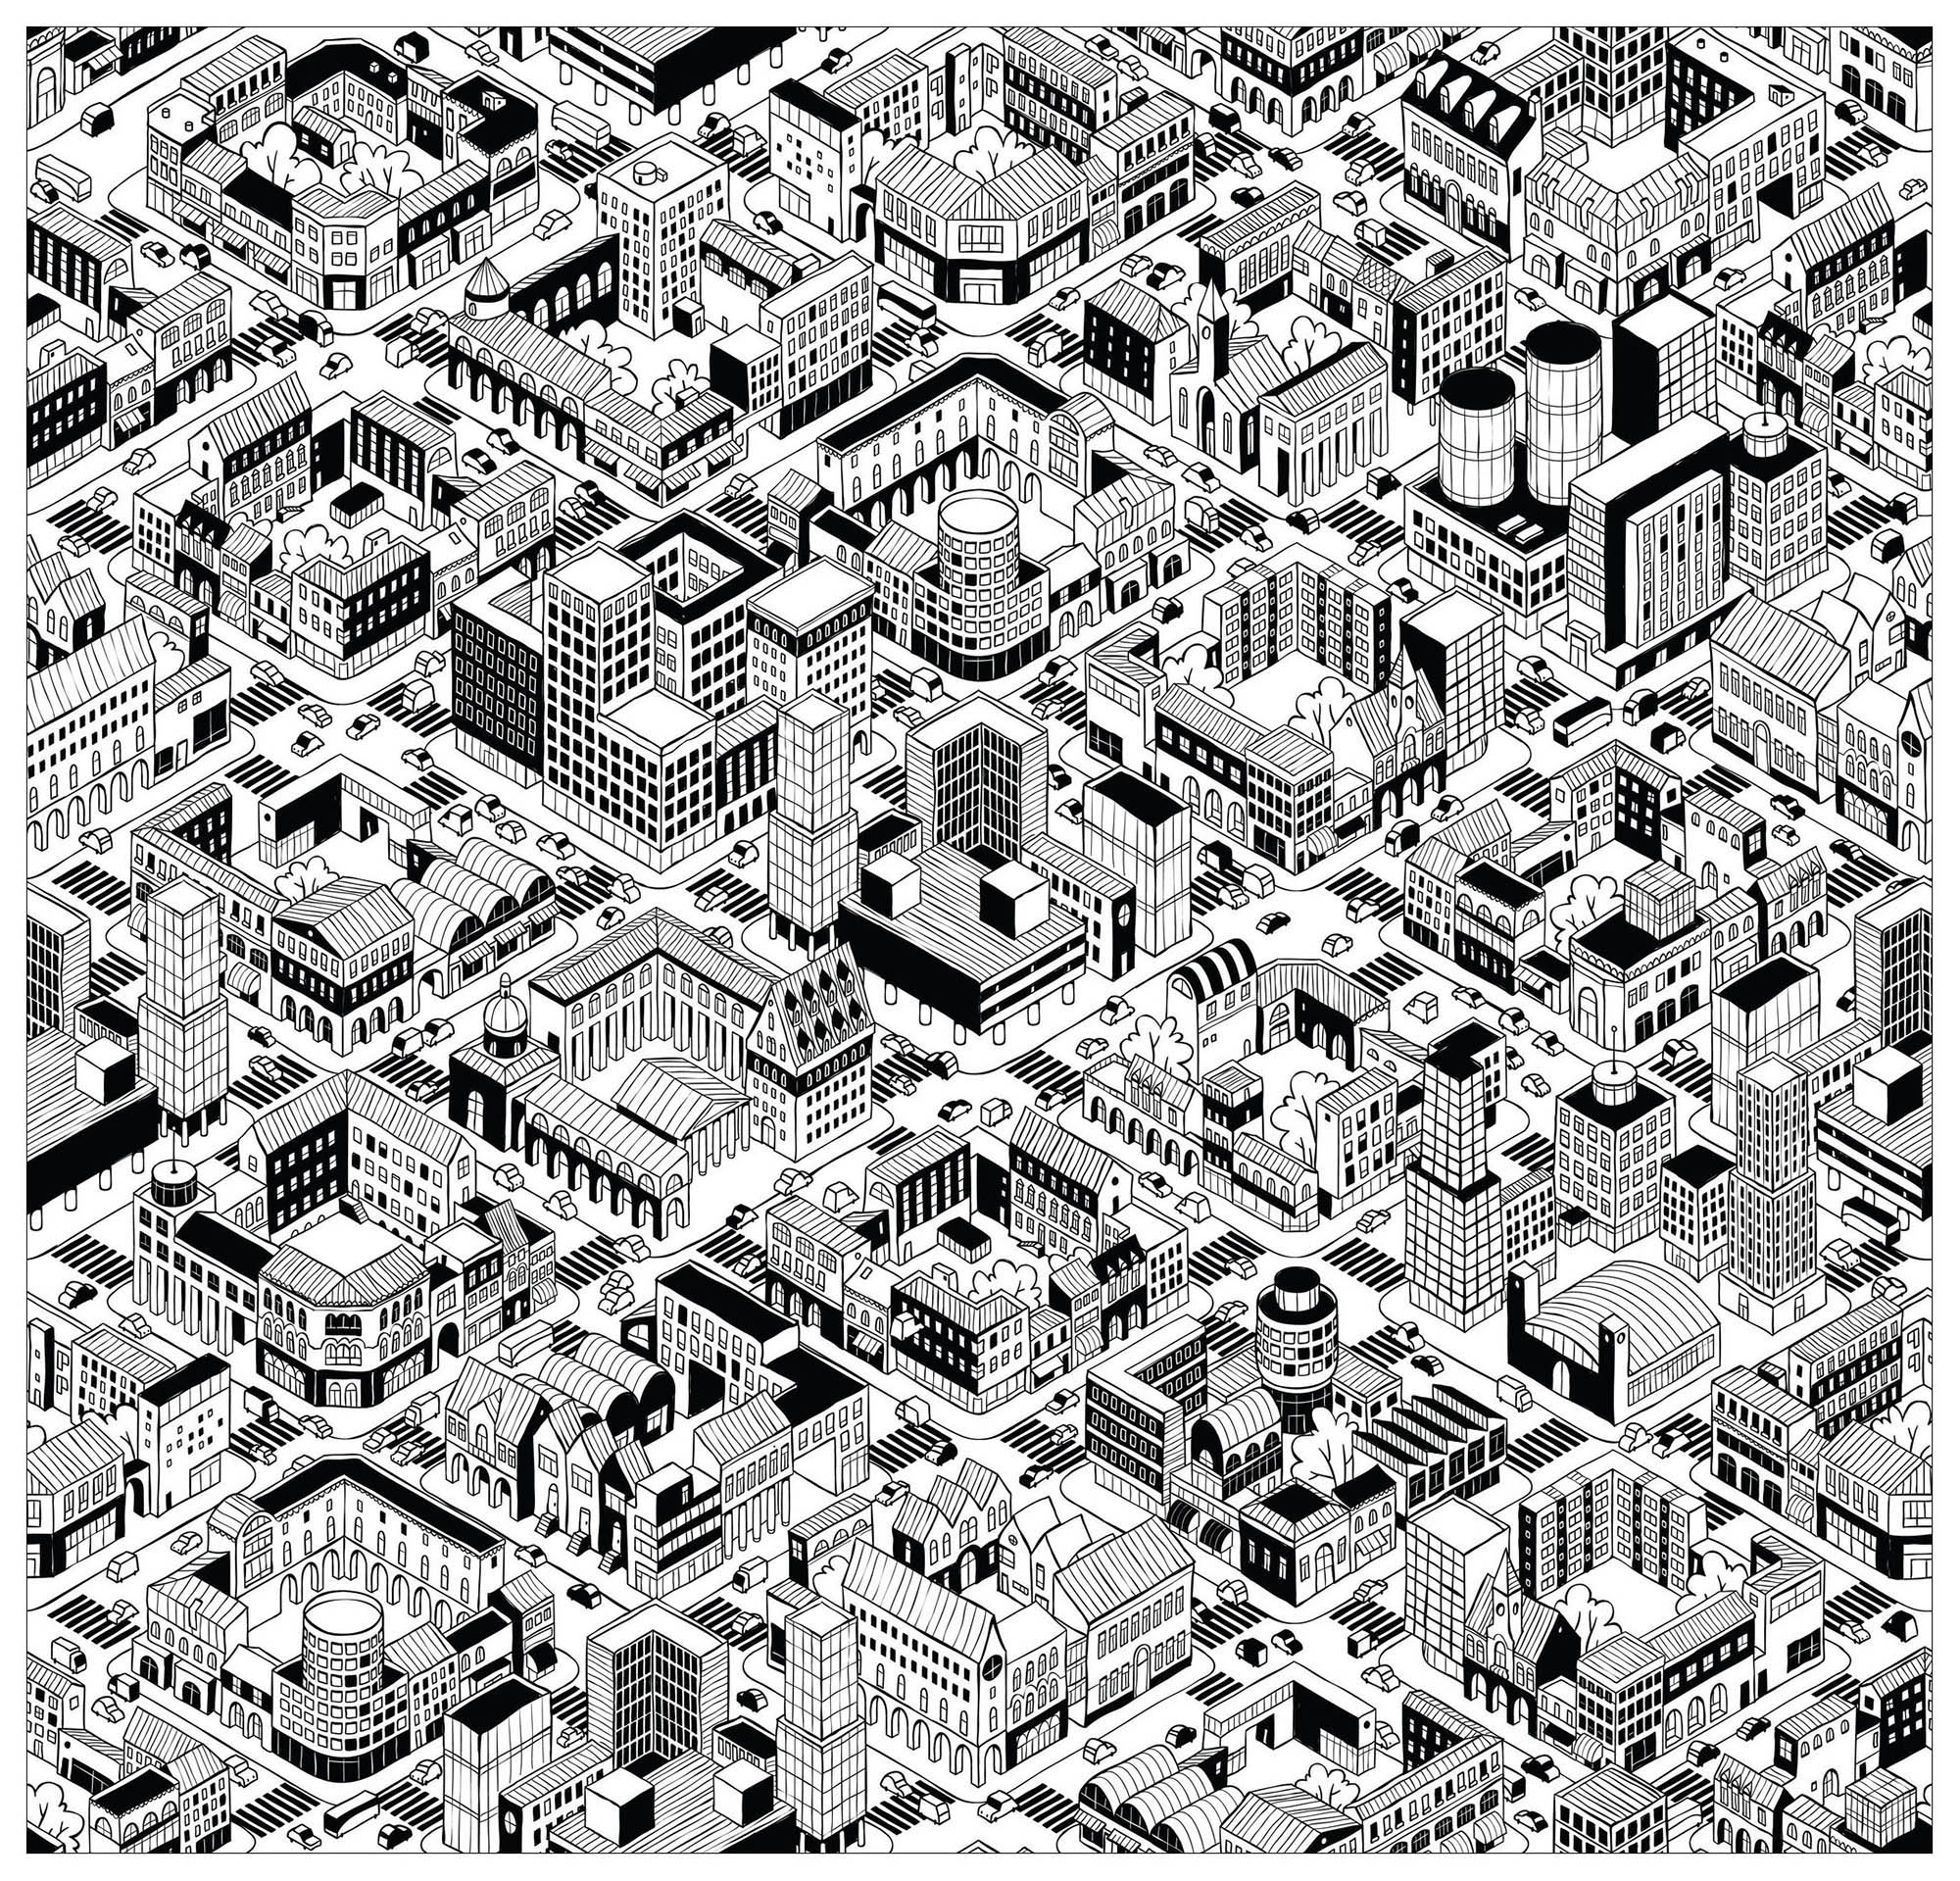 Color this city that seems to have been created in the Video game Sim City ! Incredible buildings : all different and unique, Source : 123rf   Artist : Ivook